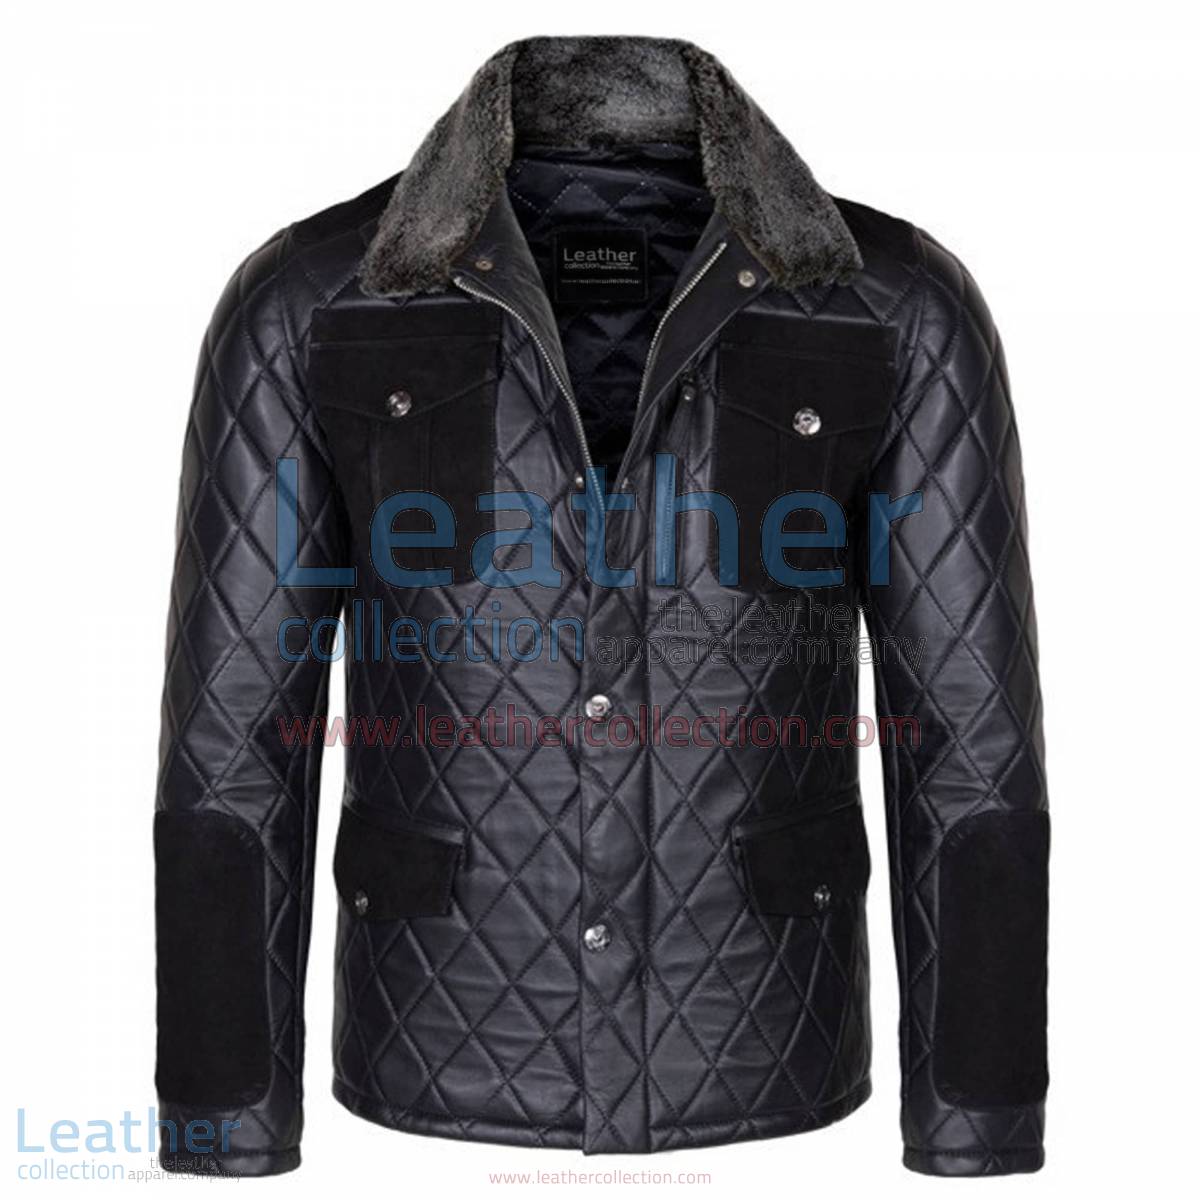 Diamond Leather Jacket with Fur Collar & Flapped Pockets | jacket with fur collar